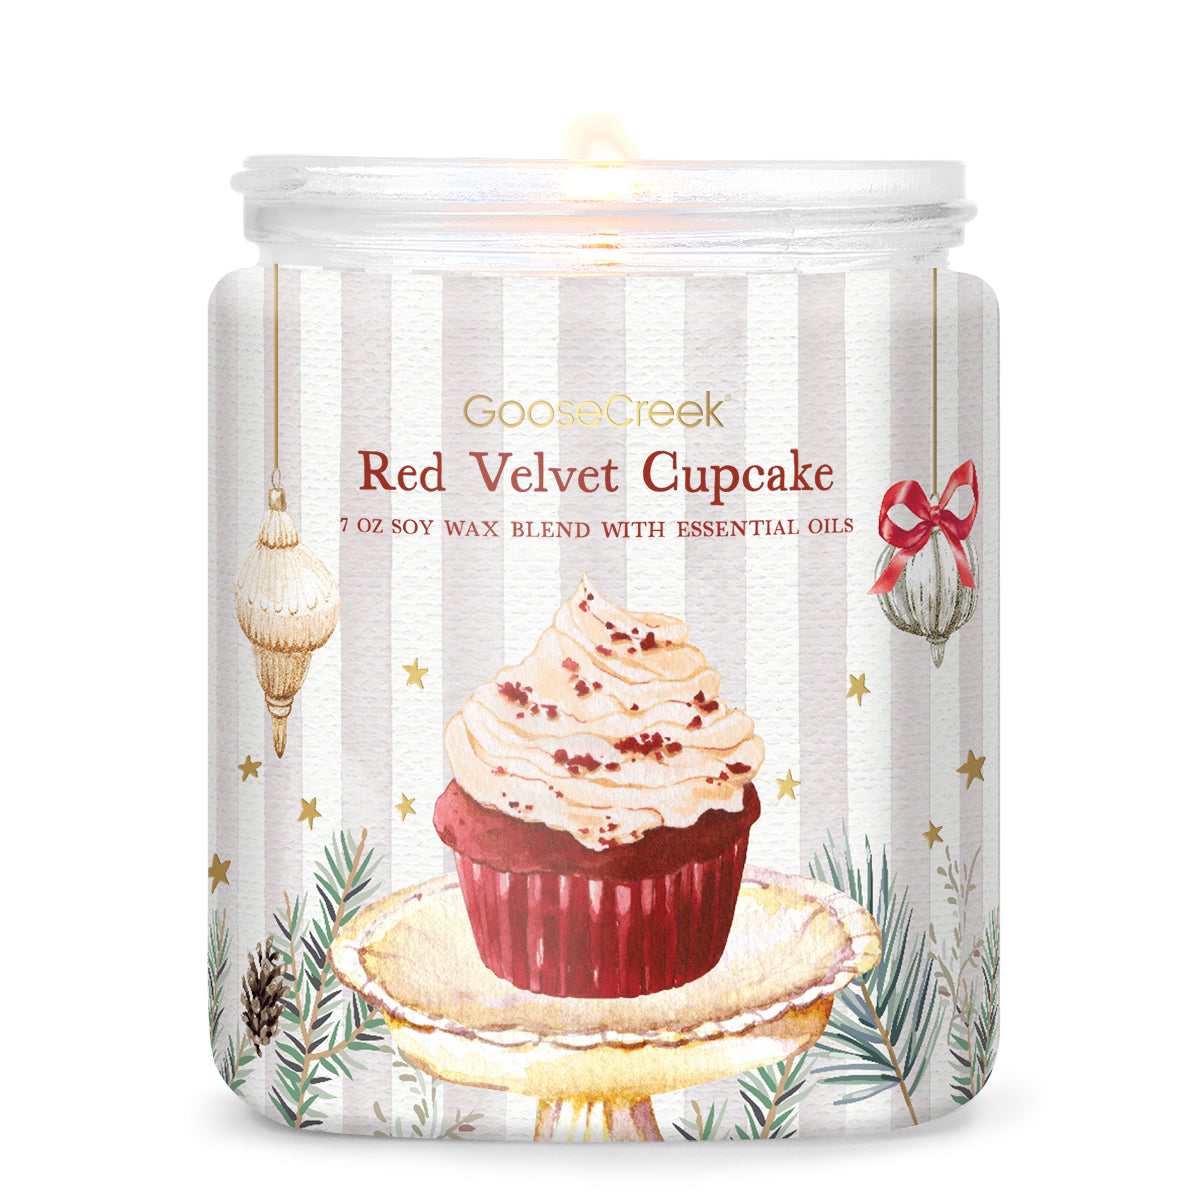 Sweet Sugar Cookie Dough Candle, Tempting Aroma of Freshly Baked Cookies, 3-Wick Soy Blend, Delicious Dessert Scent, Memorable Childhood Memories